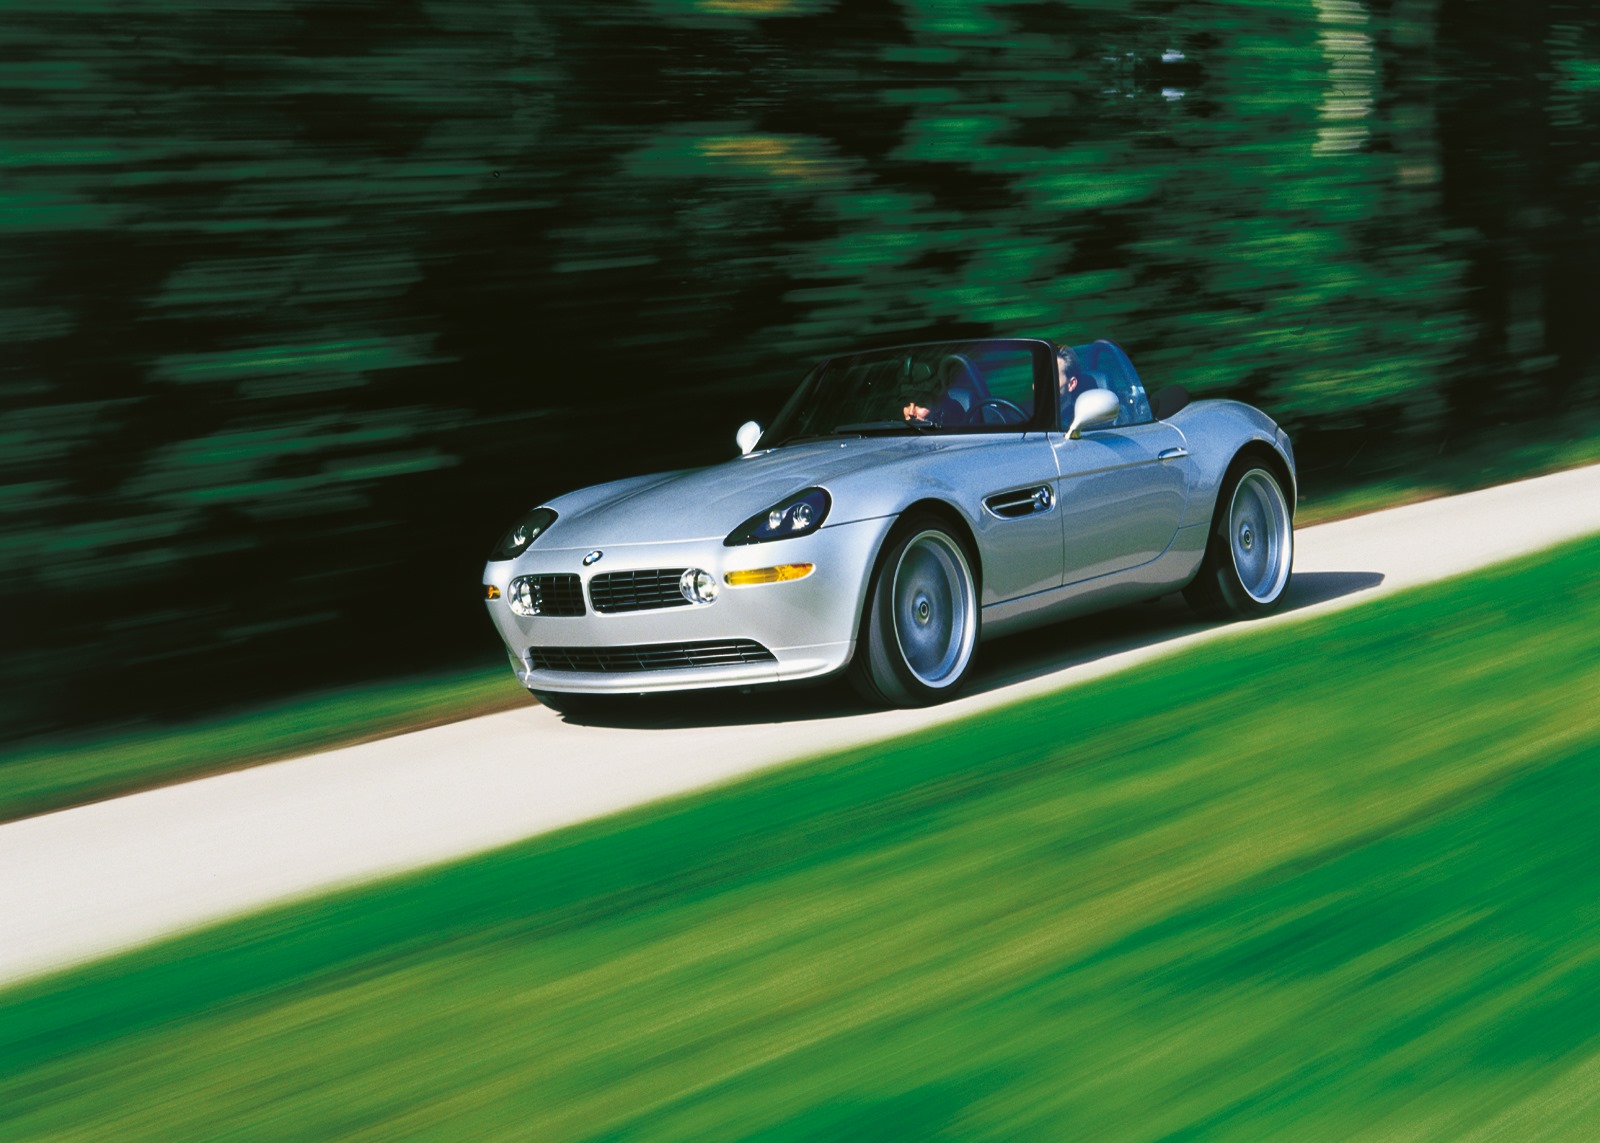 Z8 Limited Edition 2021 The Rare Bmw Alpina Roadster V8 Limited Edition Pistonleaks